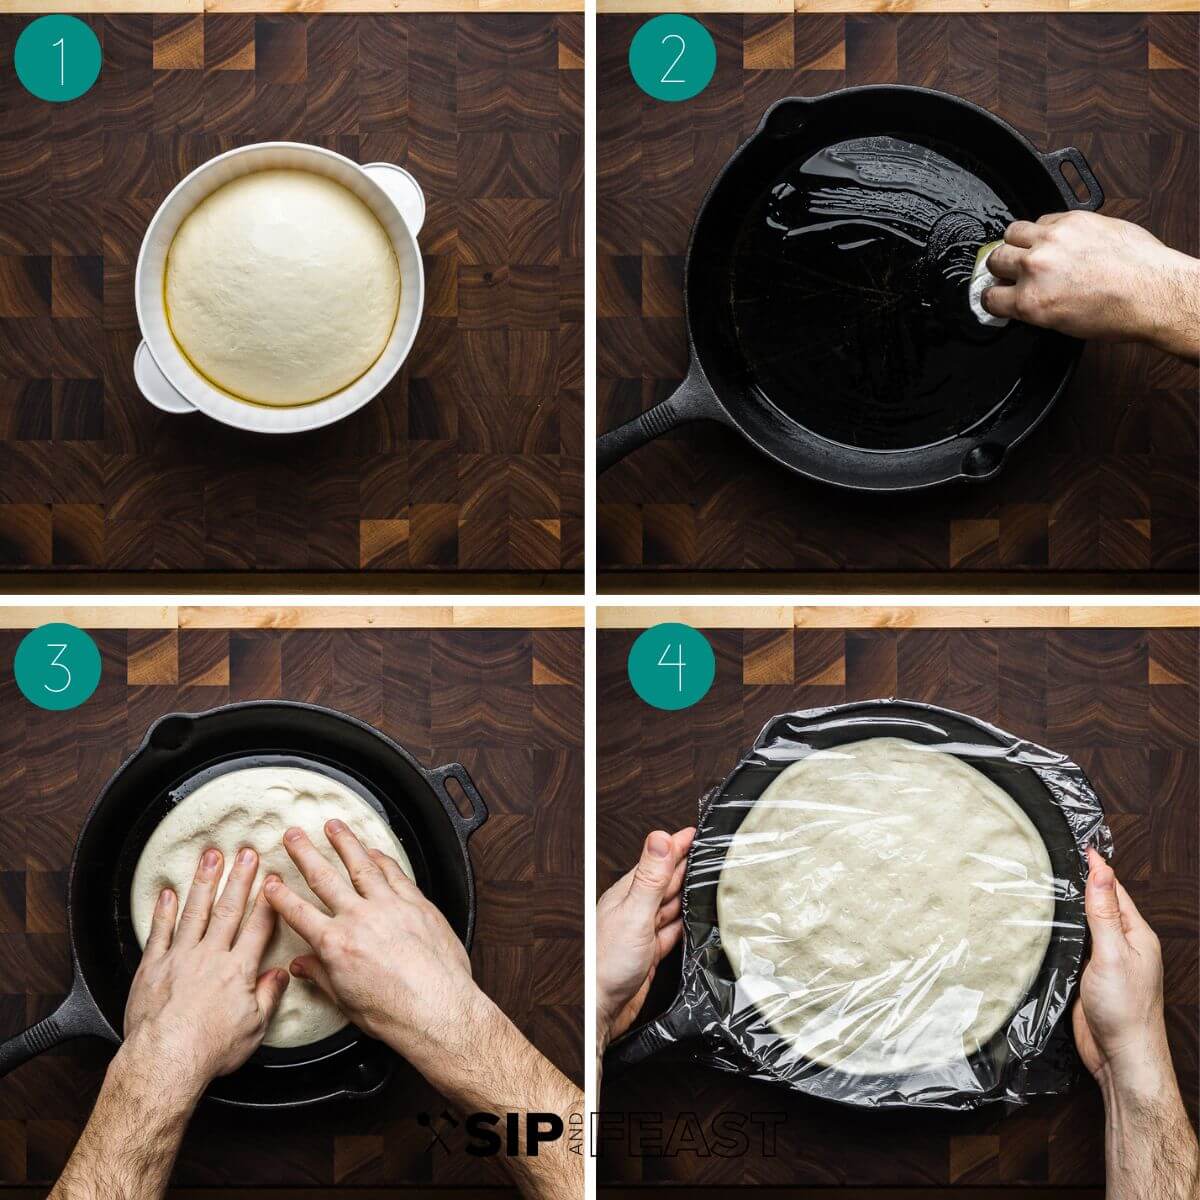 Cast iron pan pizza recipe process shot collage group number one.